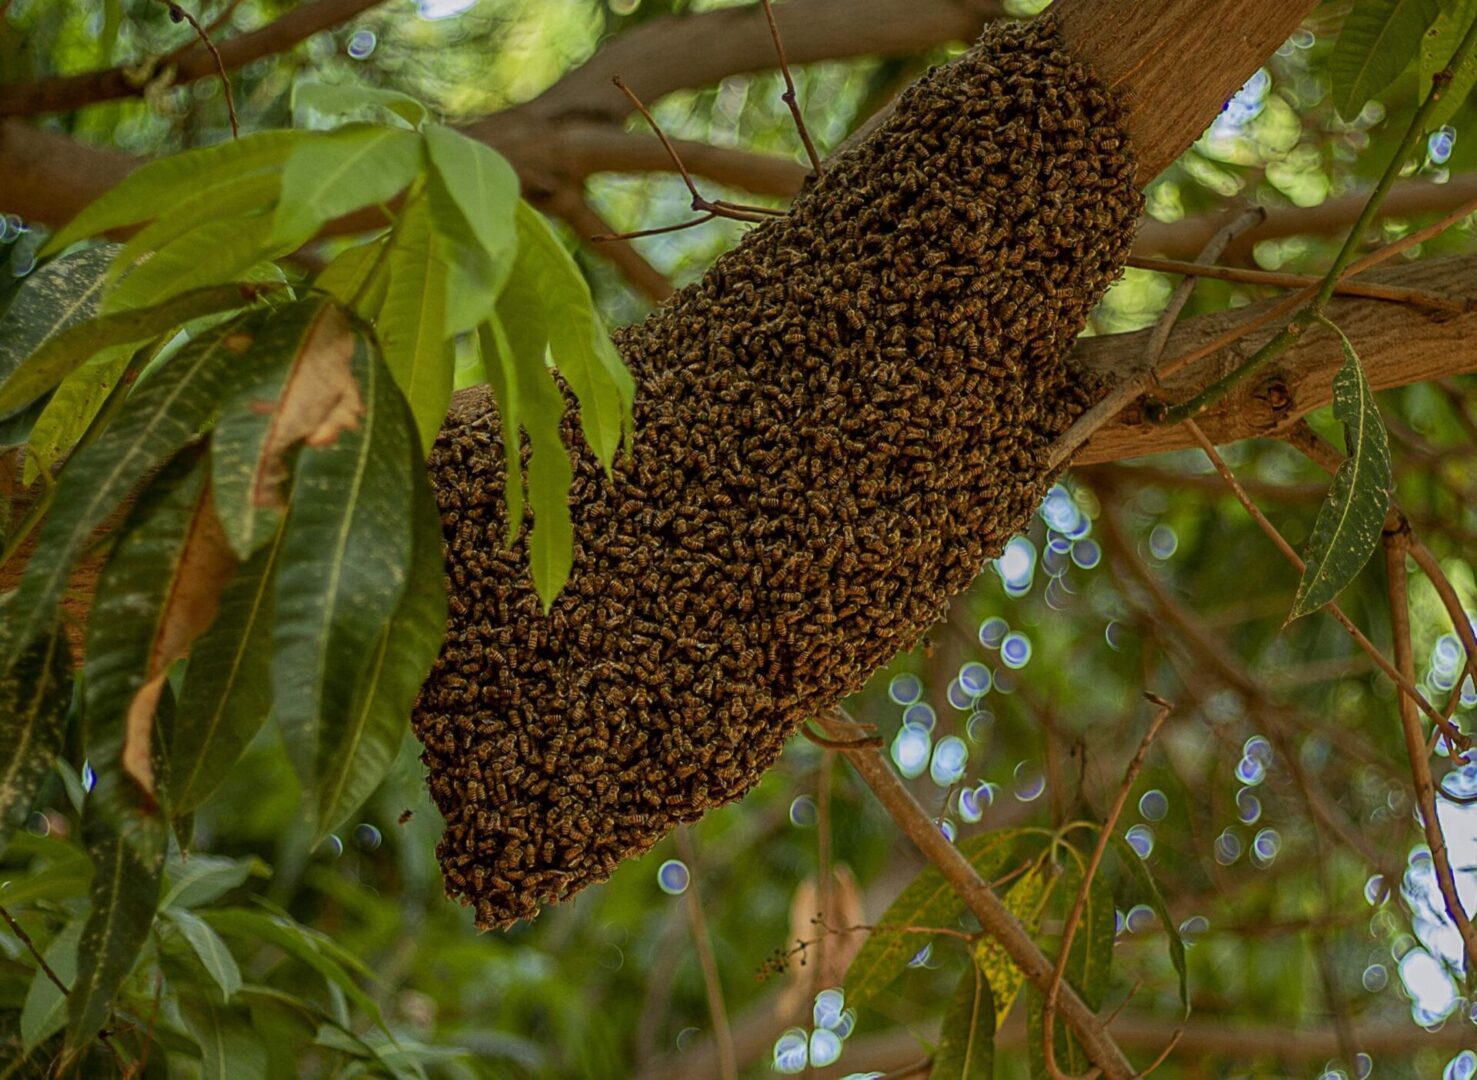 A swarm of bees hanging from the side of a tree.